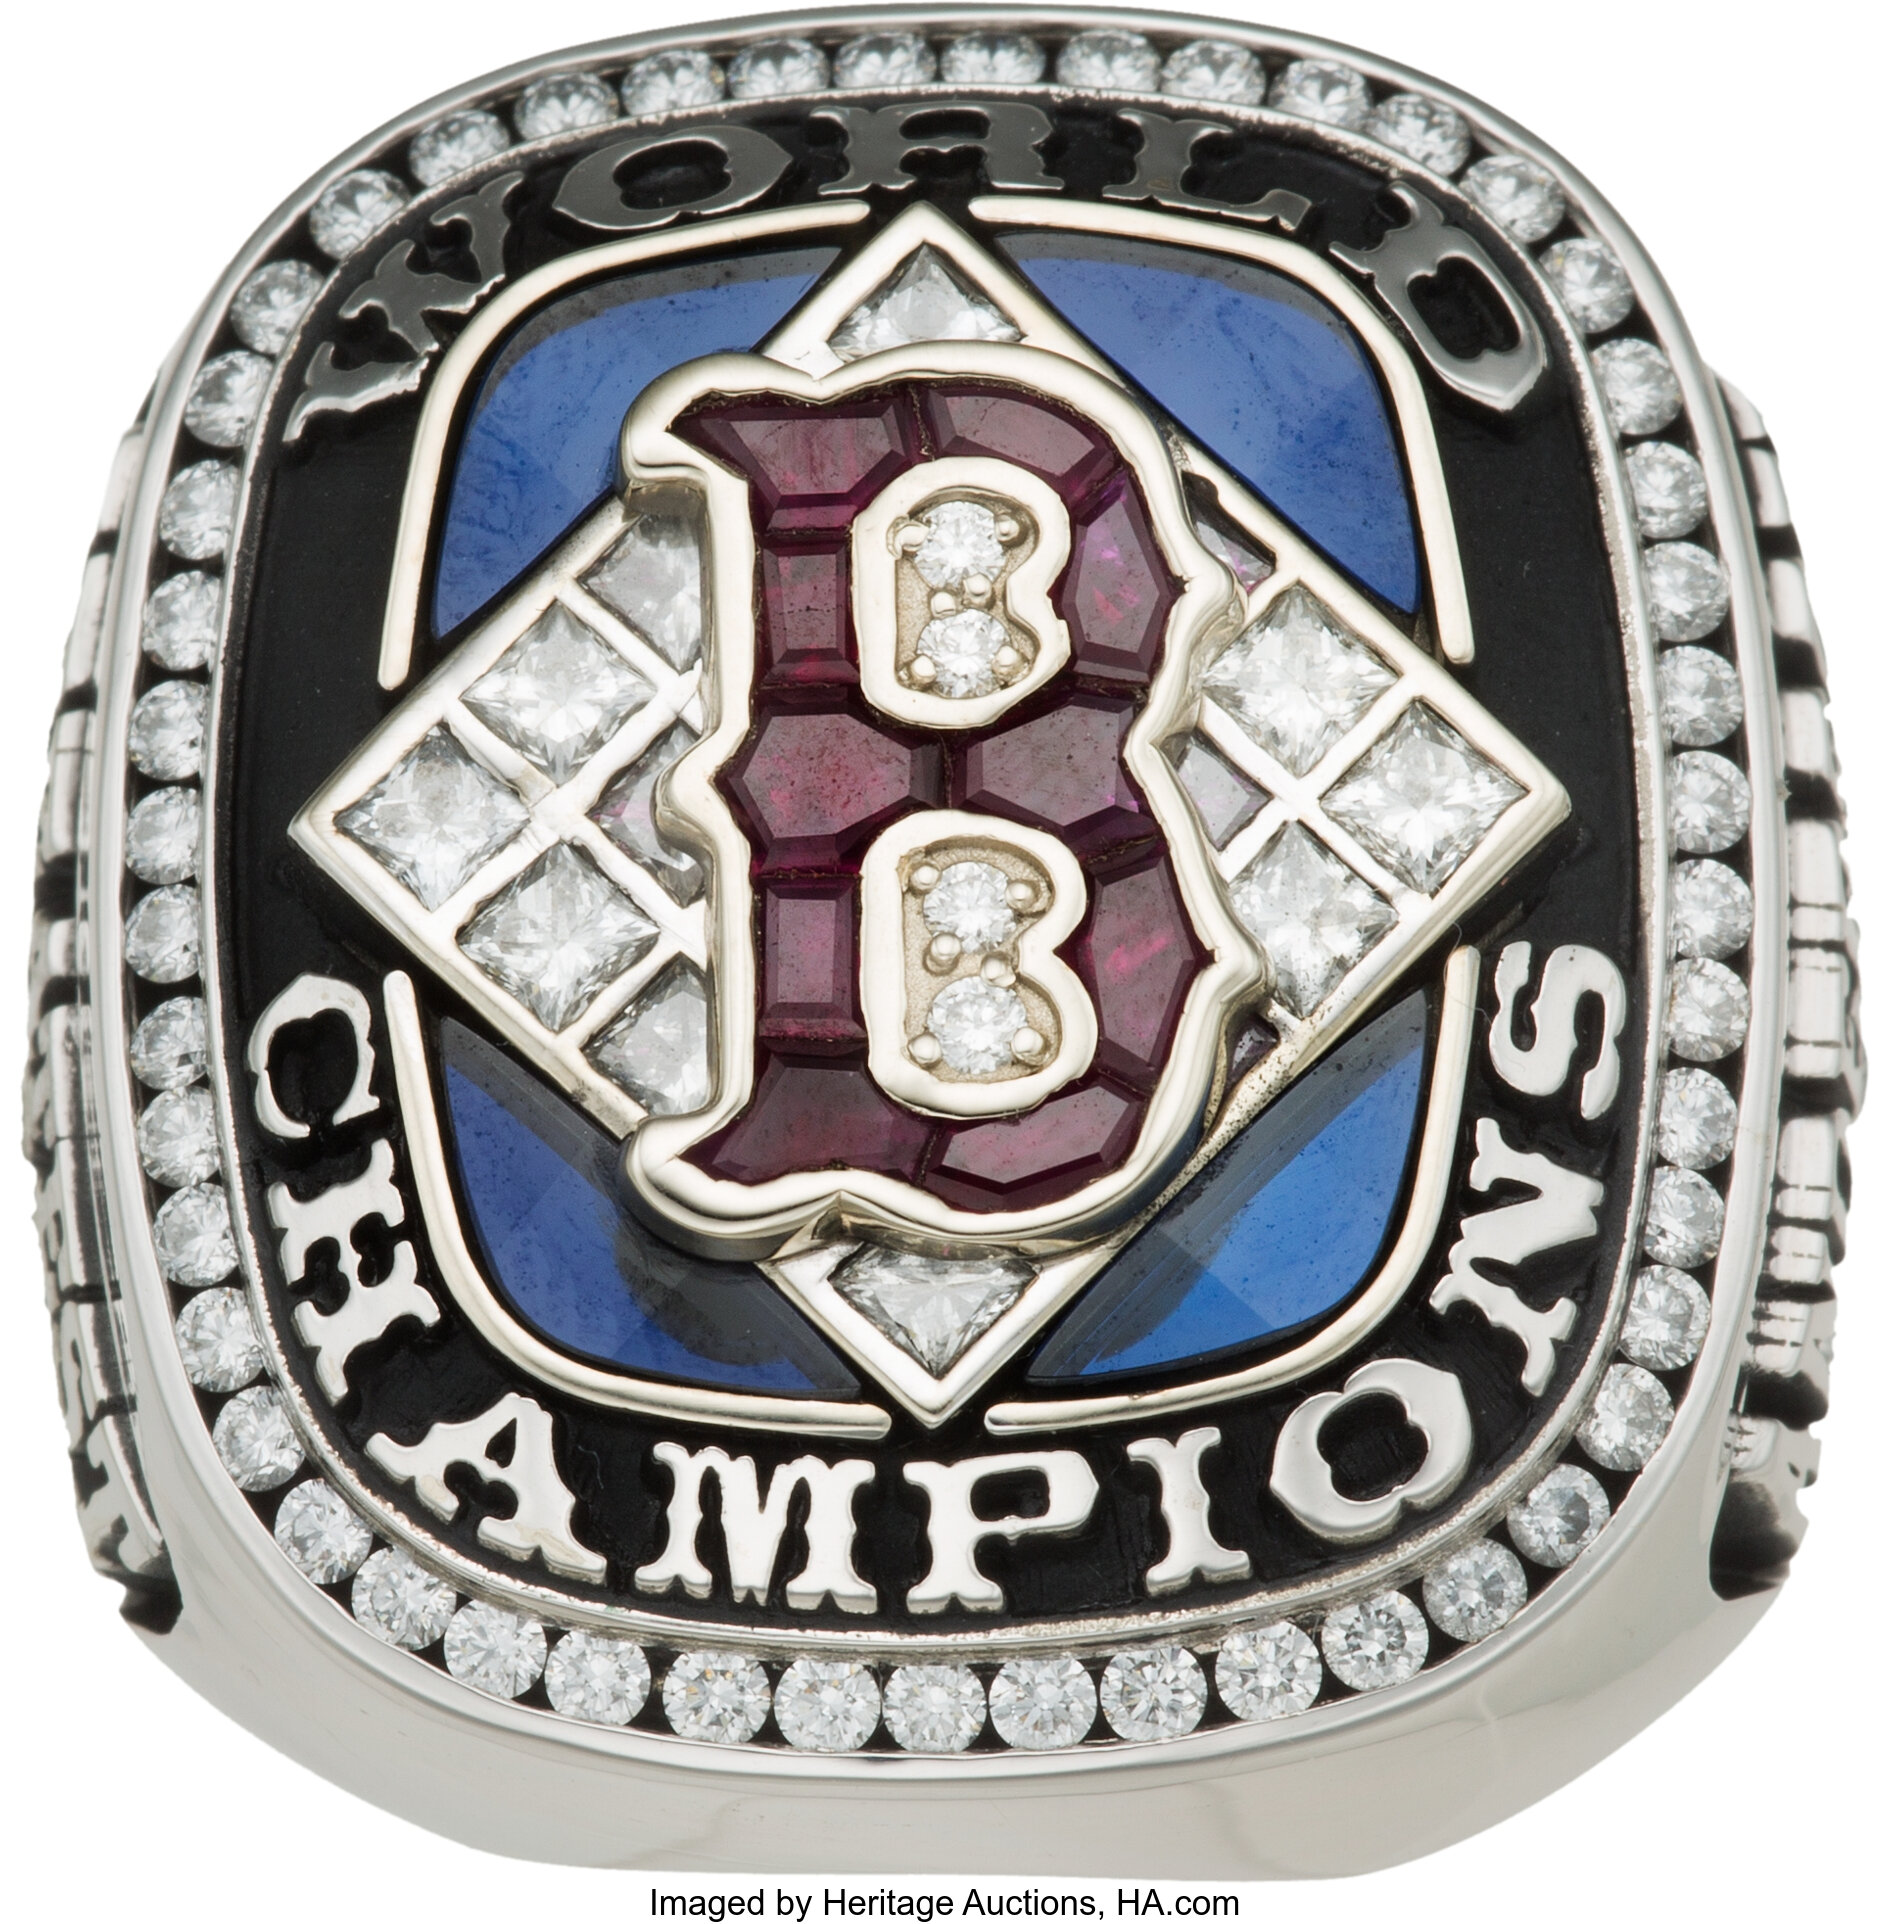 Red Sox World Series Champs 2004